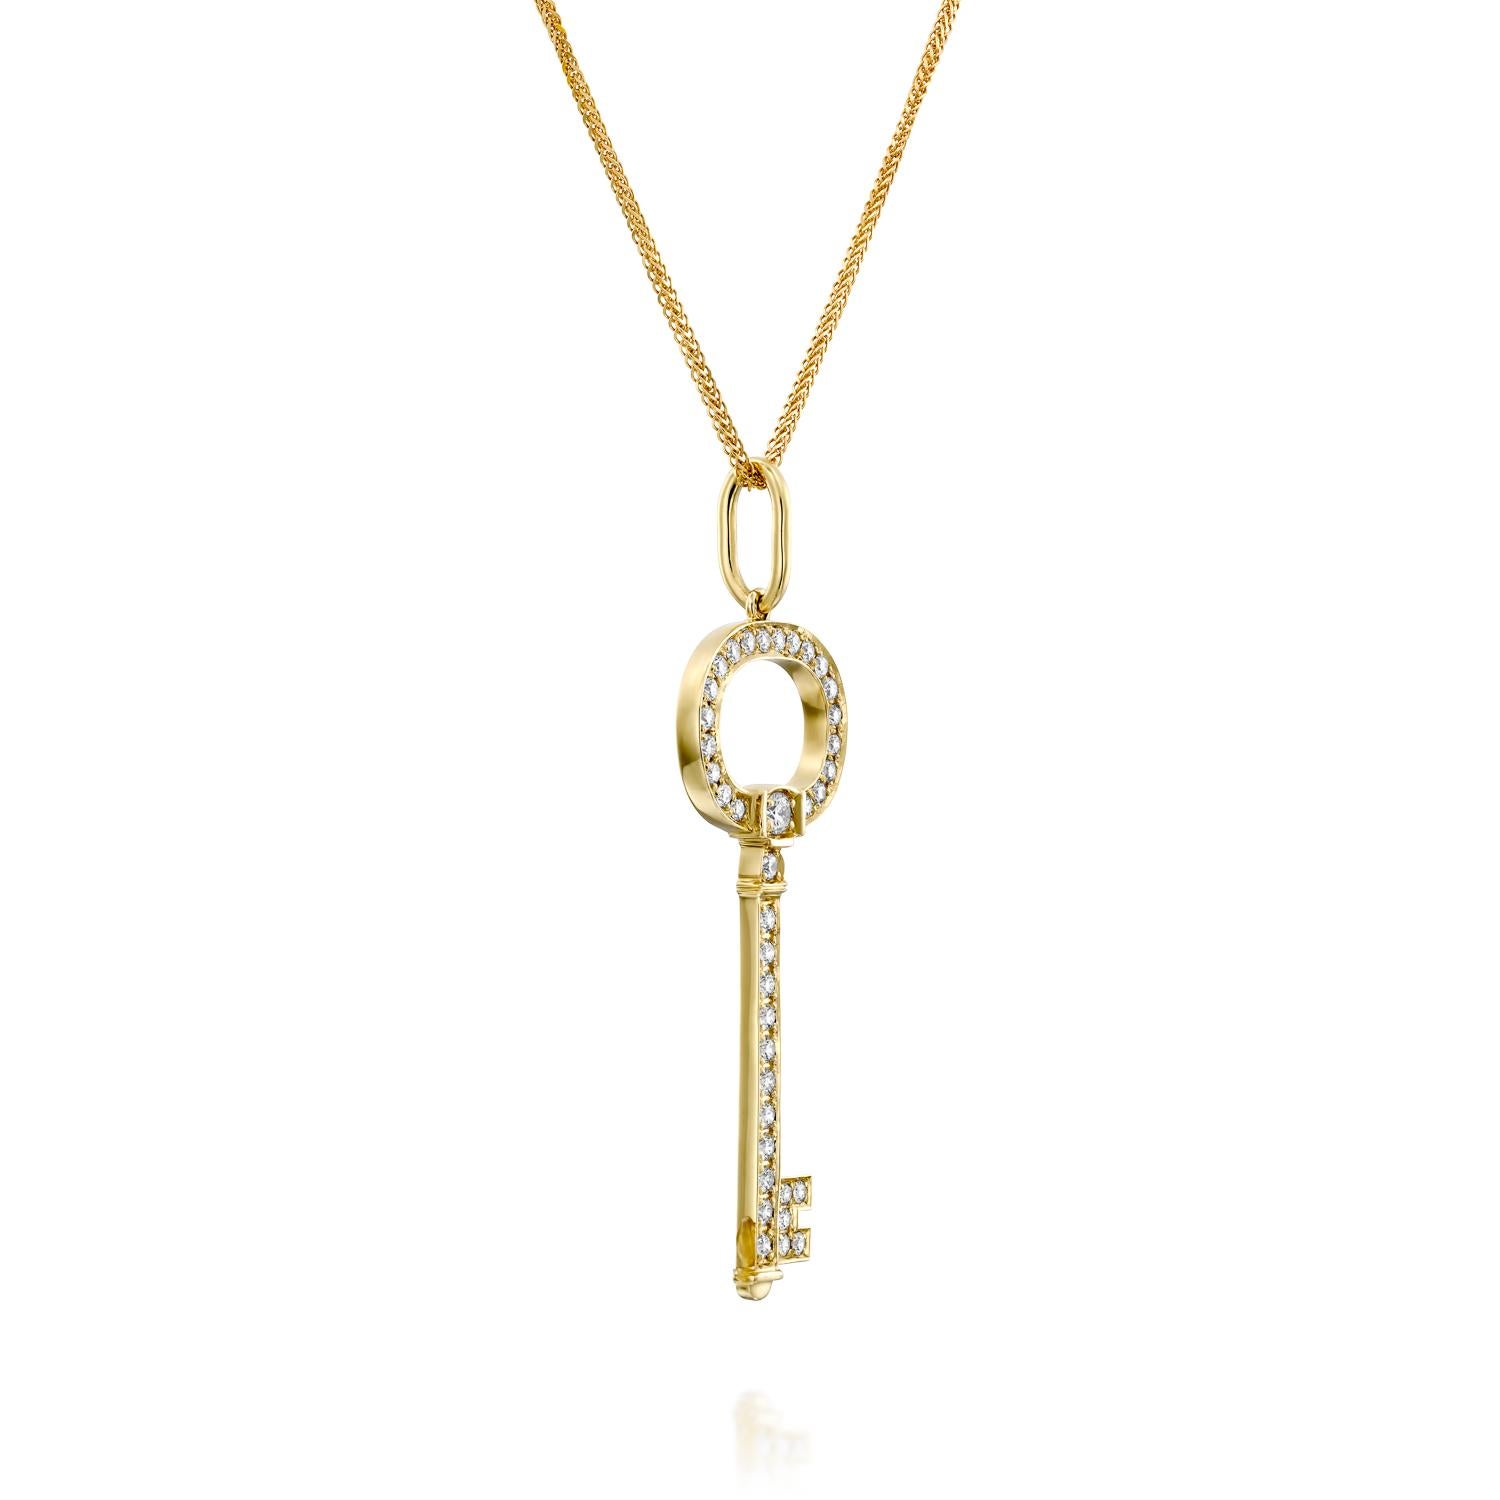 Indulge in the epitome of sophistication with our Diamond Yellow Gold Key Pendant. This exquisite piece effortlessly merges trendy design with timeless class, making it a true statement accessory. Adorned with 0.65 carats of dazzling F/VVS diamonds,